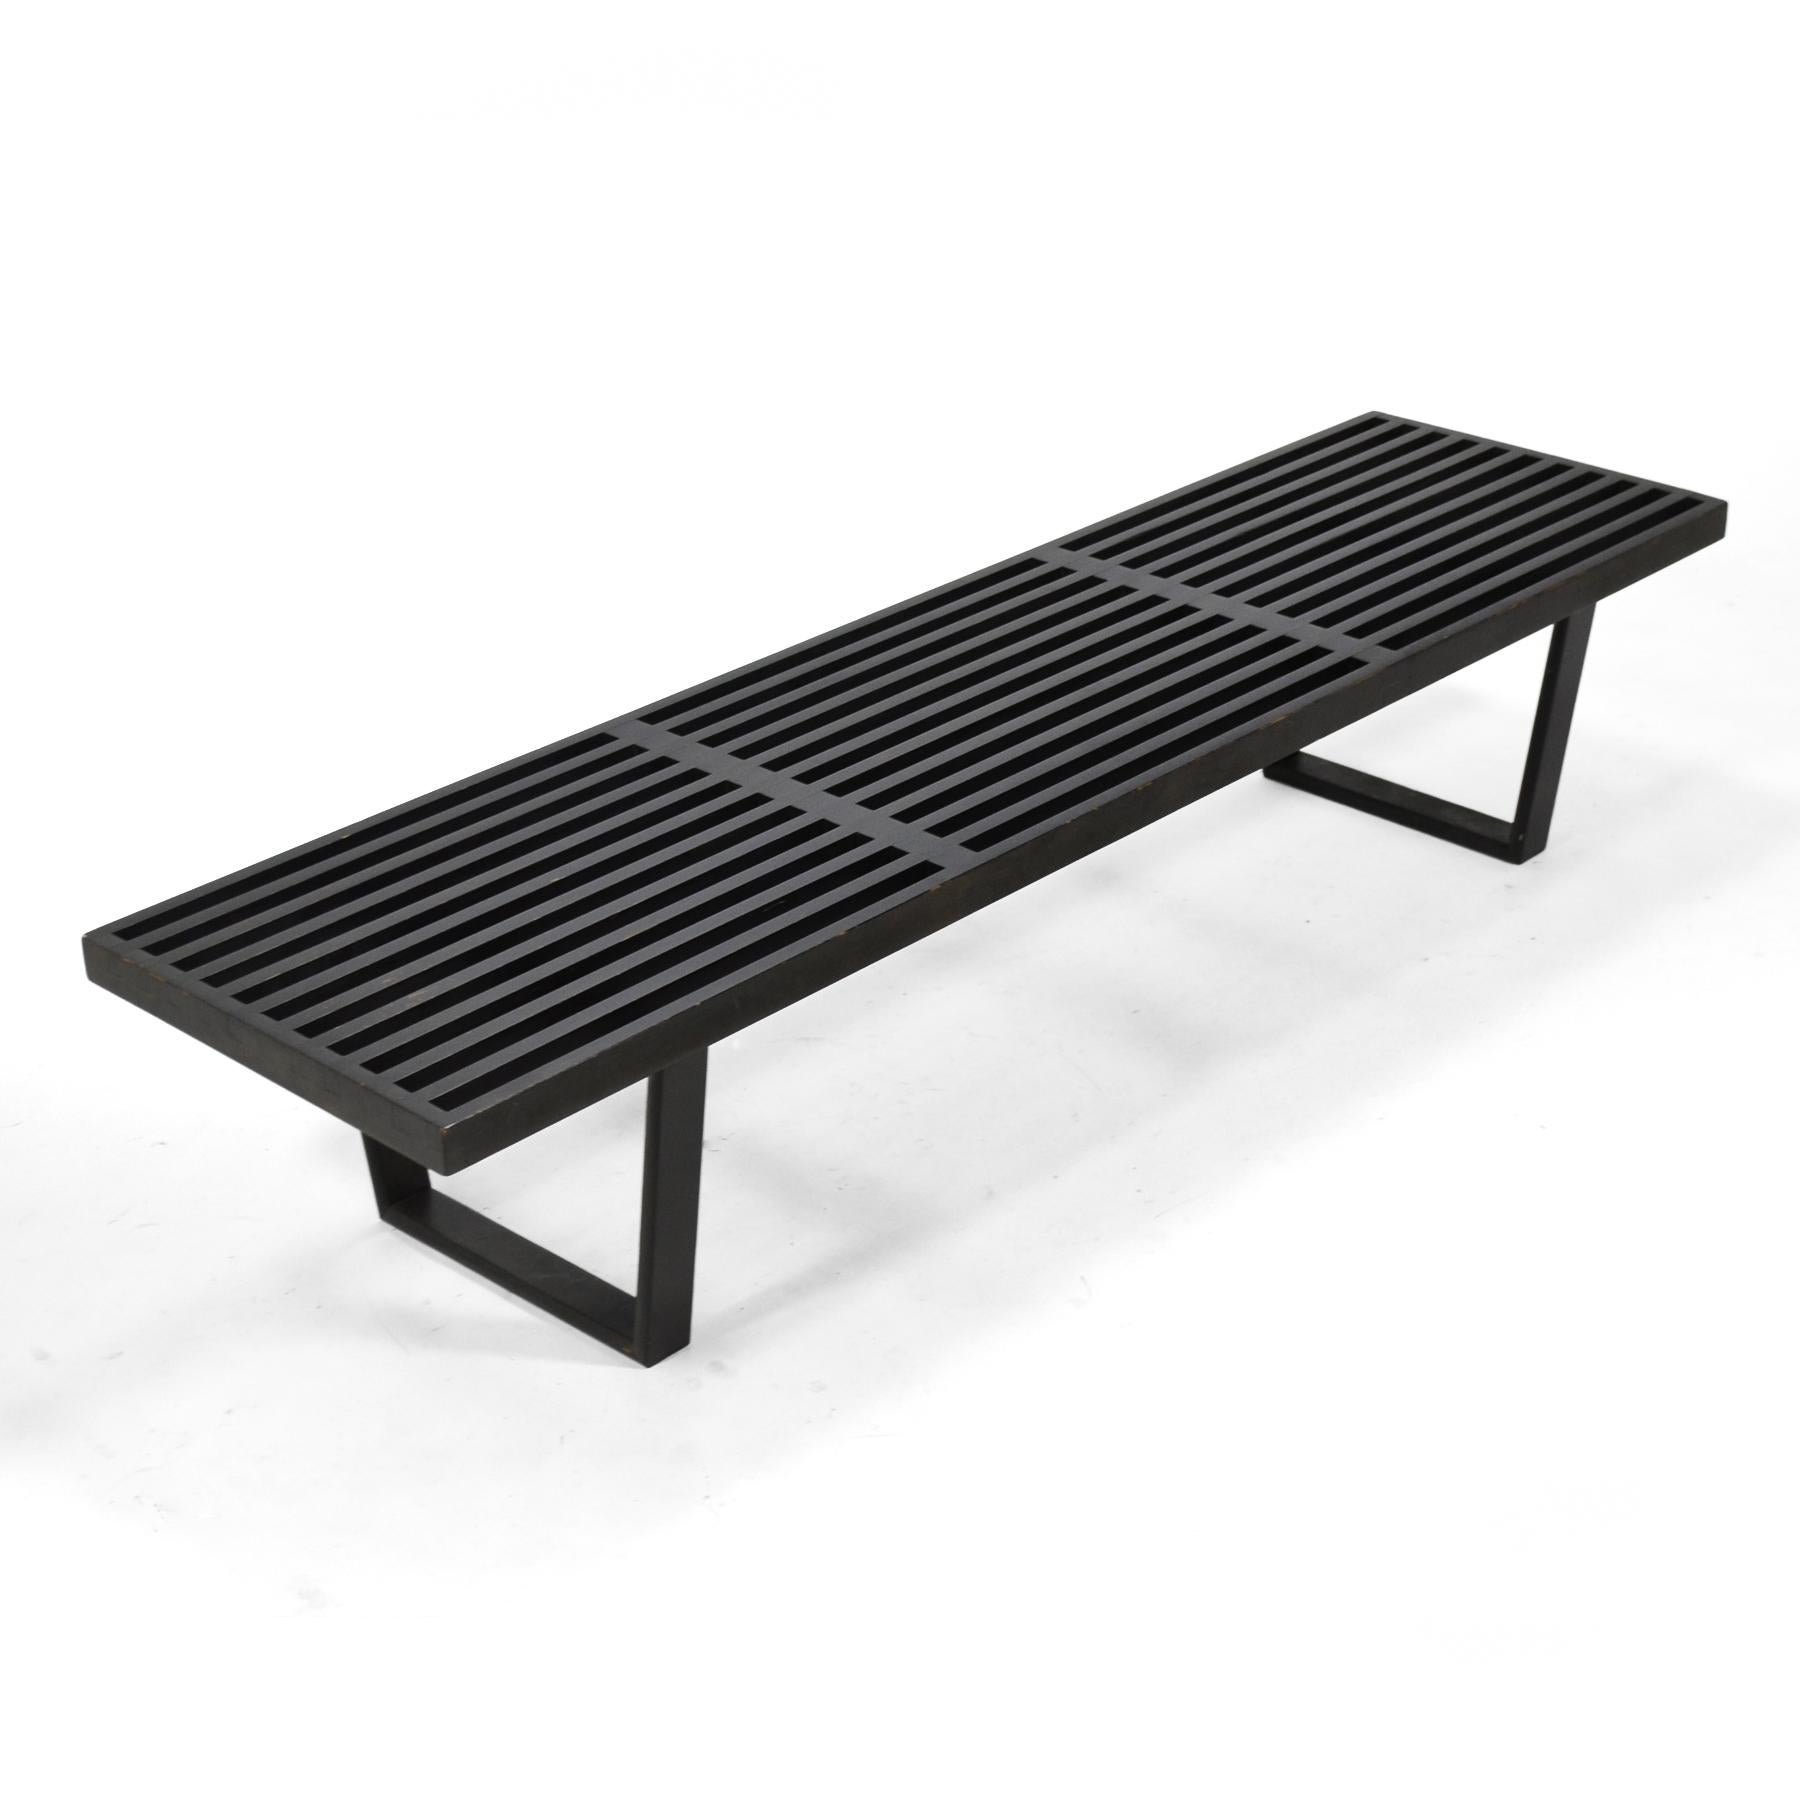 American Early George Nelson Slat Platform Bench/ Table by Herman Miller